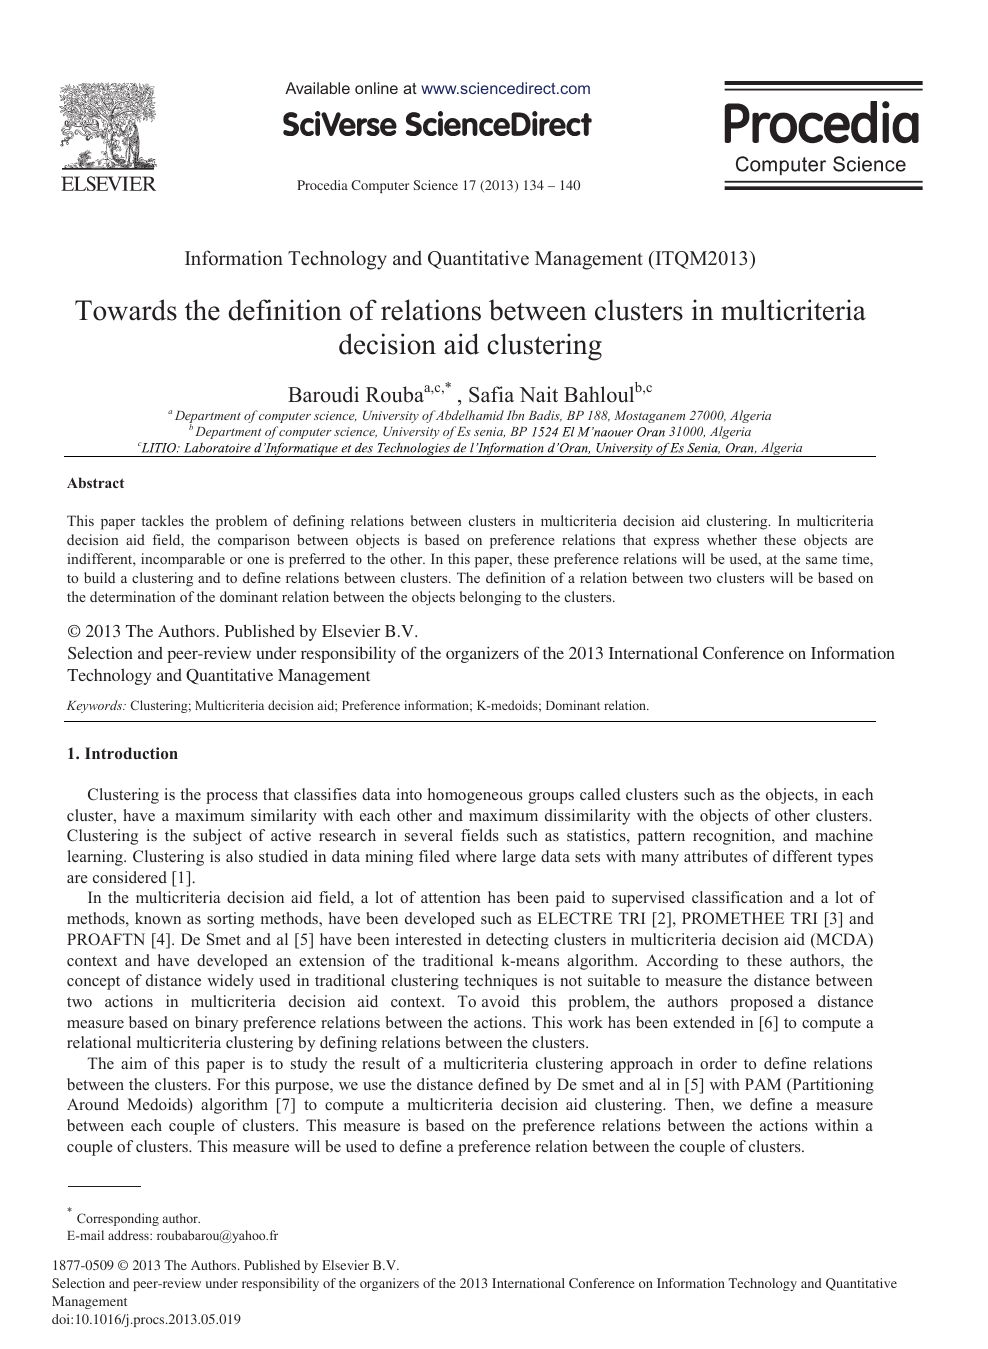 Towards The Definition Of Relations Between Clusters In Multicriteria Decision Aid Clustering Topic Of Research Paper In Computer And Information Sciences Download Scholarly Article Pdf And Read For Free On Cyberleninka